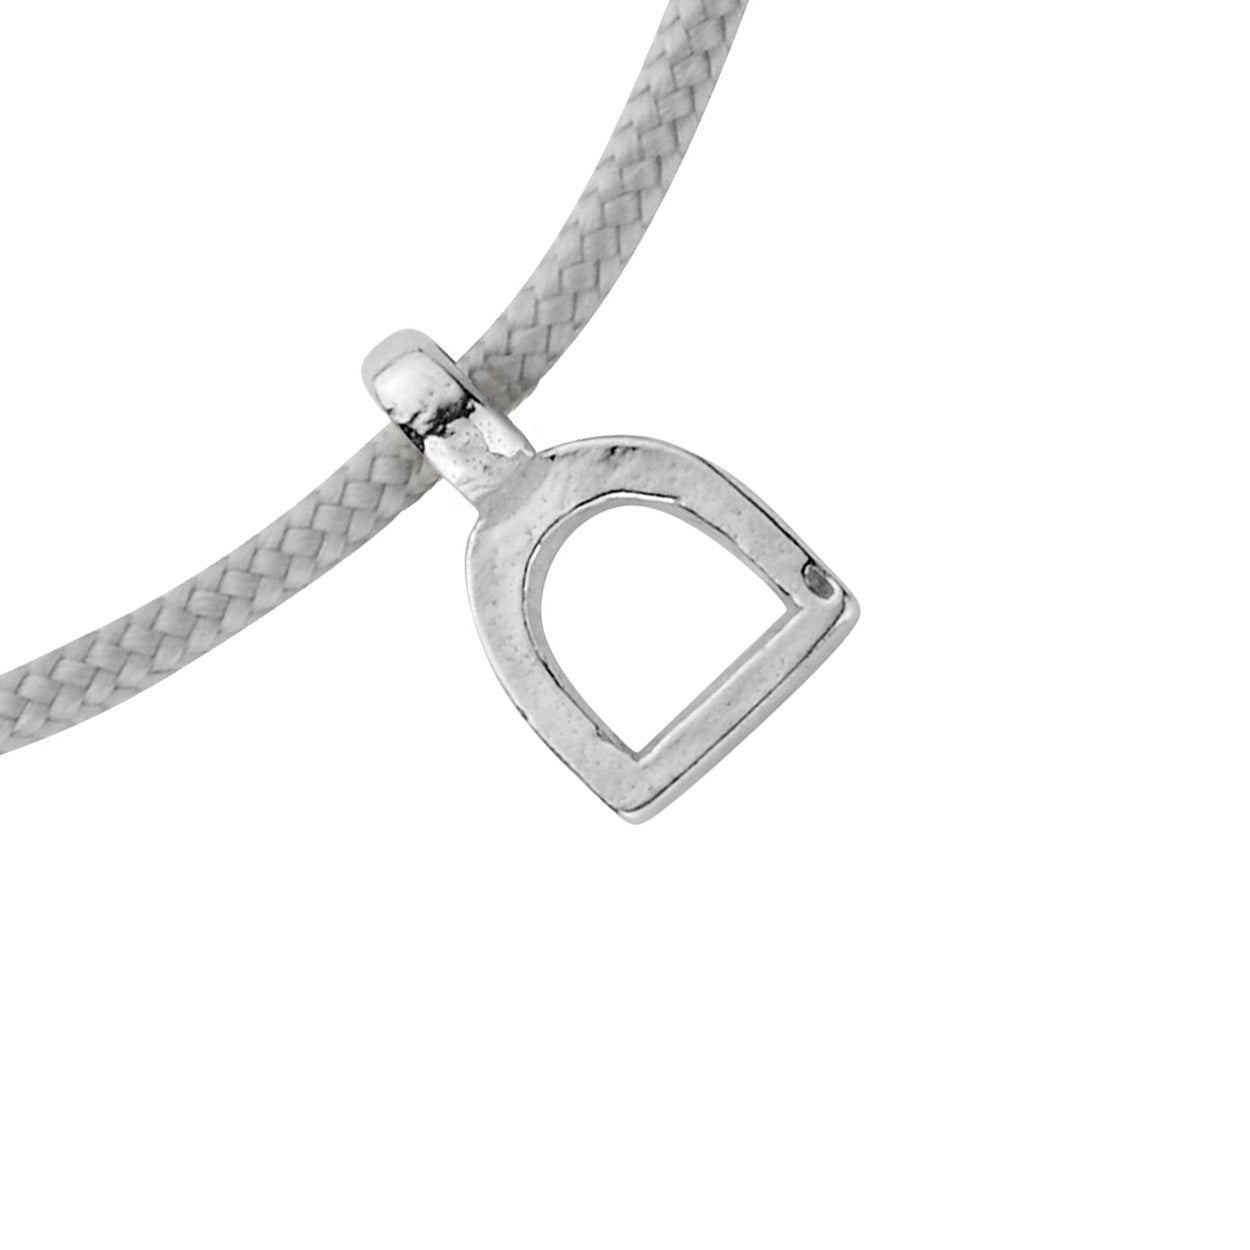 Silver Baby Stirrup Sailing Rope